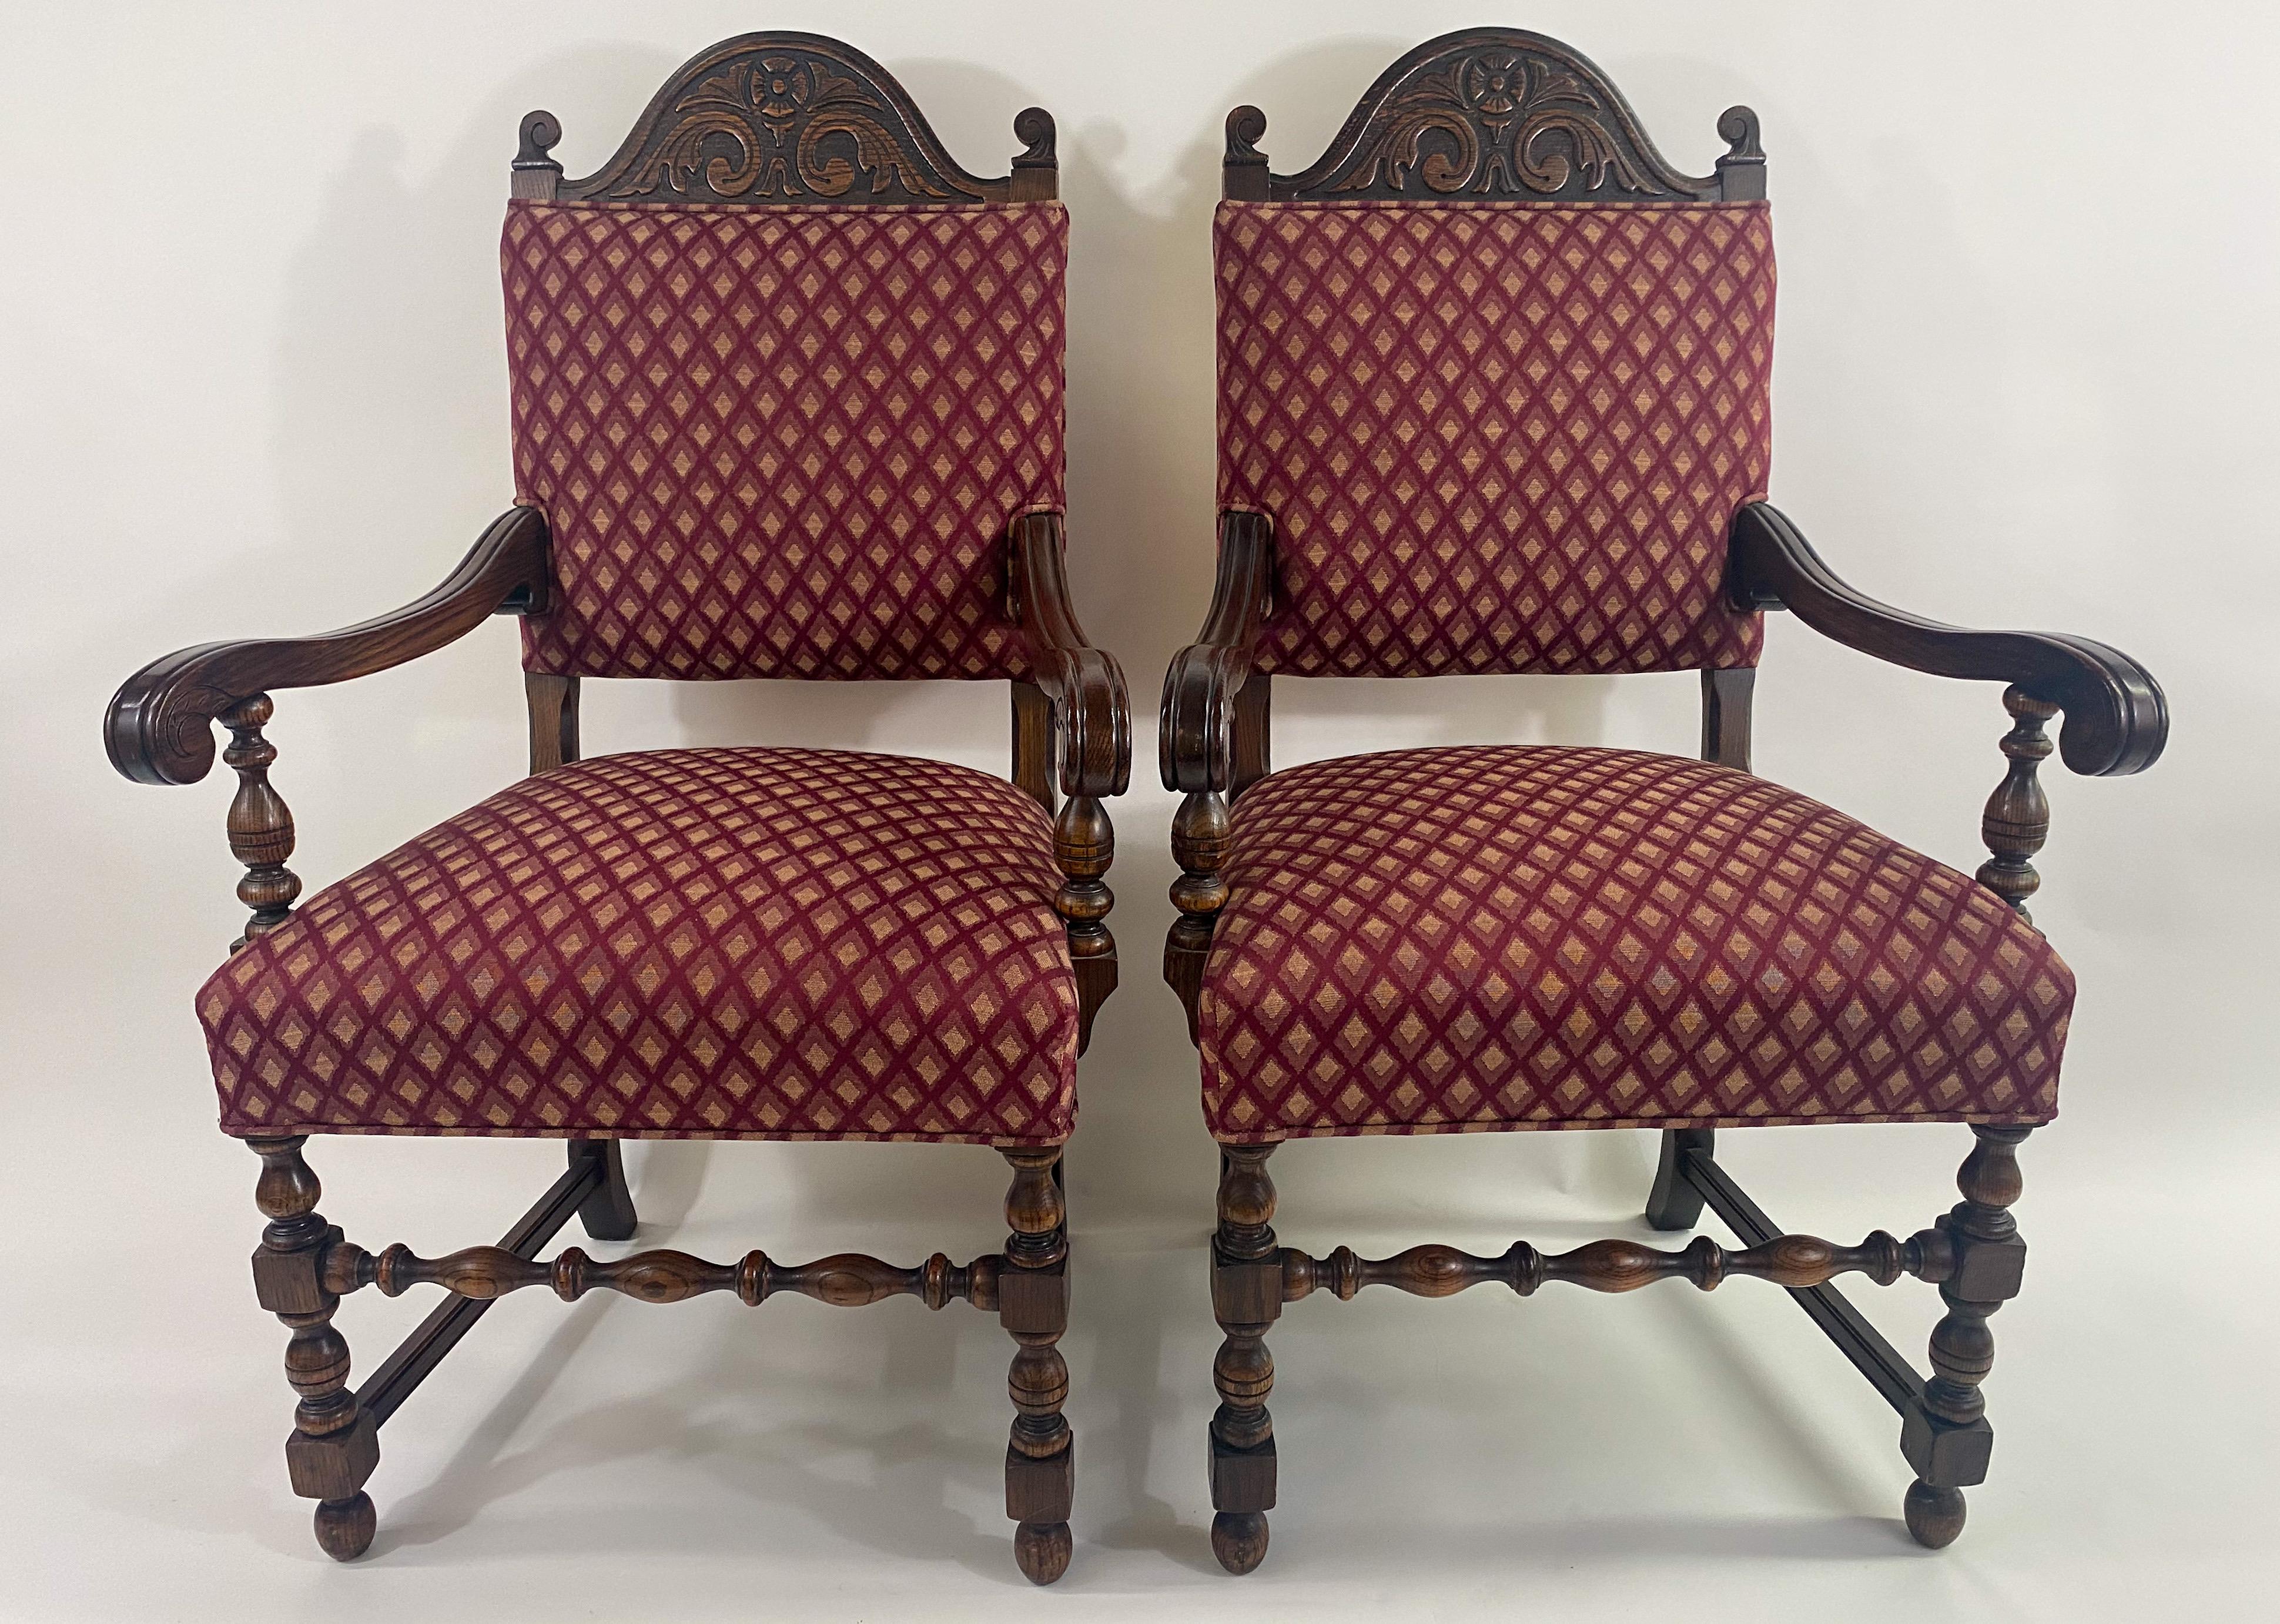 A pair of classic Jacobean style arm or Berger chairs. The chairs are hand-carved of high quality oak and show elegant geometrical motifs. The chairs feature serpentine crest rail and turned baluster legs connected with an H stretcher. The beautiful